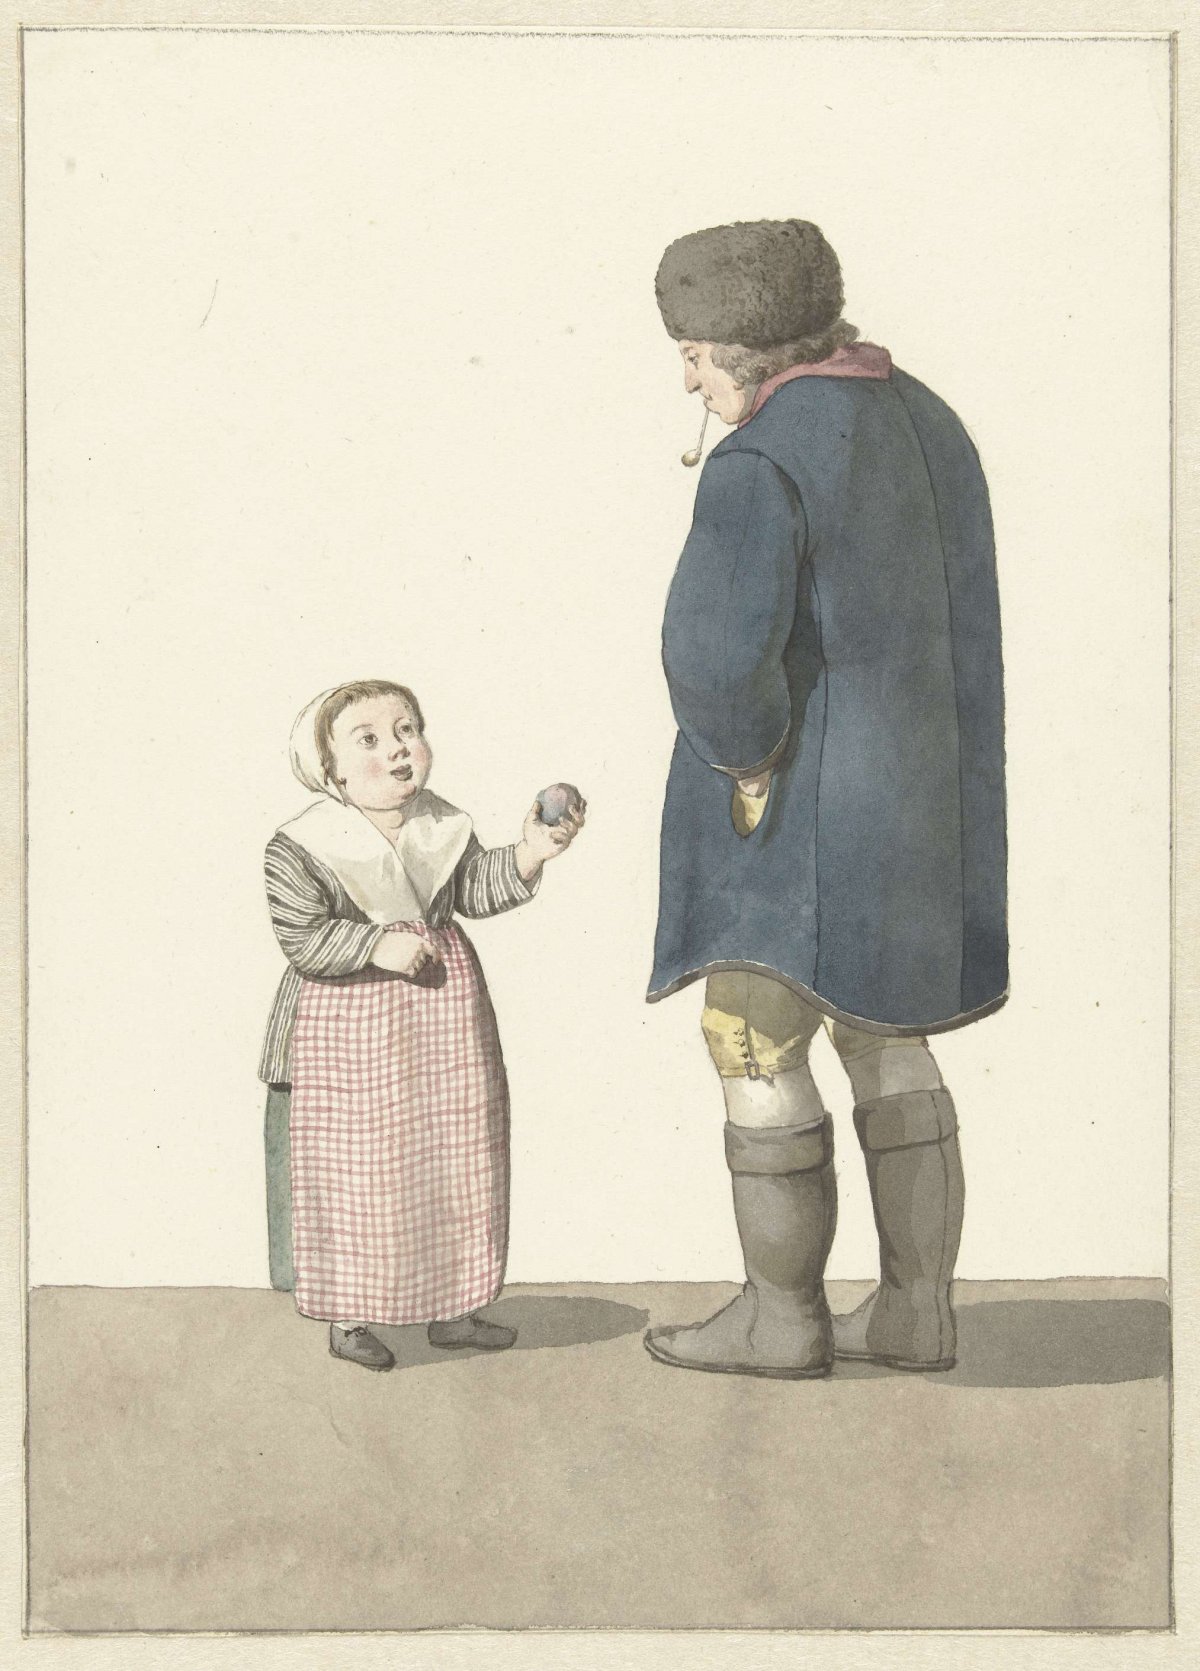 Girl with ball standing in front of a man, W. Barthautz, 1700 - 1800